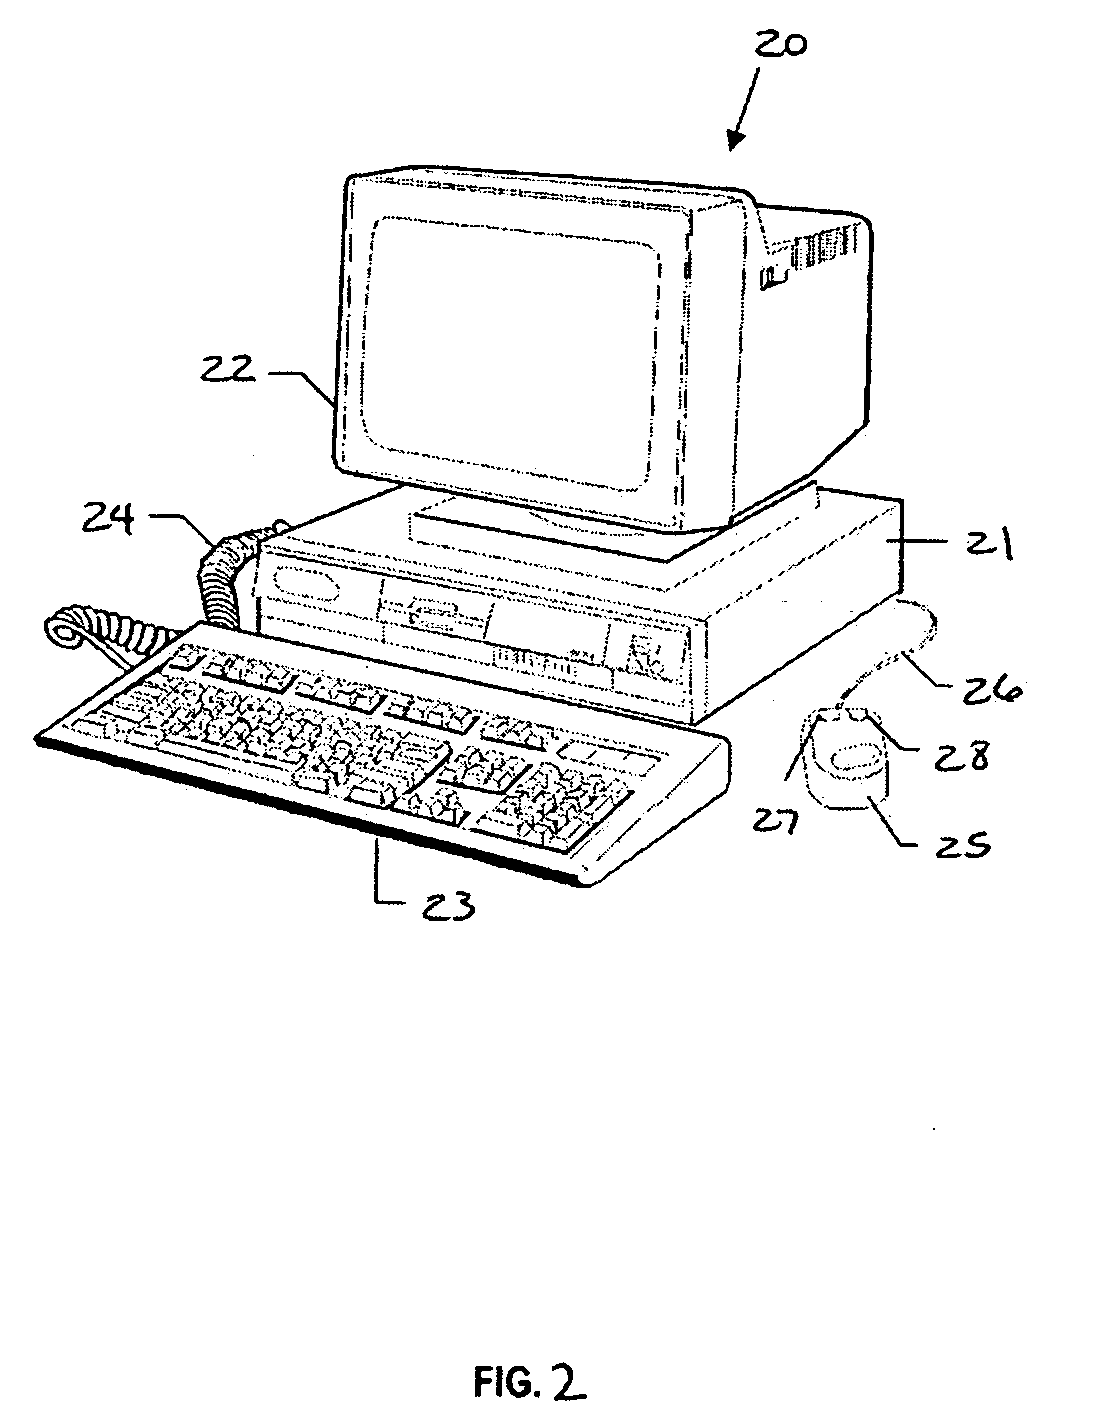 Method and system for adjusting a display based on user distance from display device